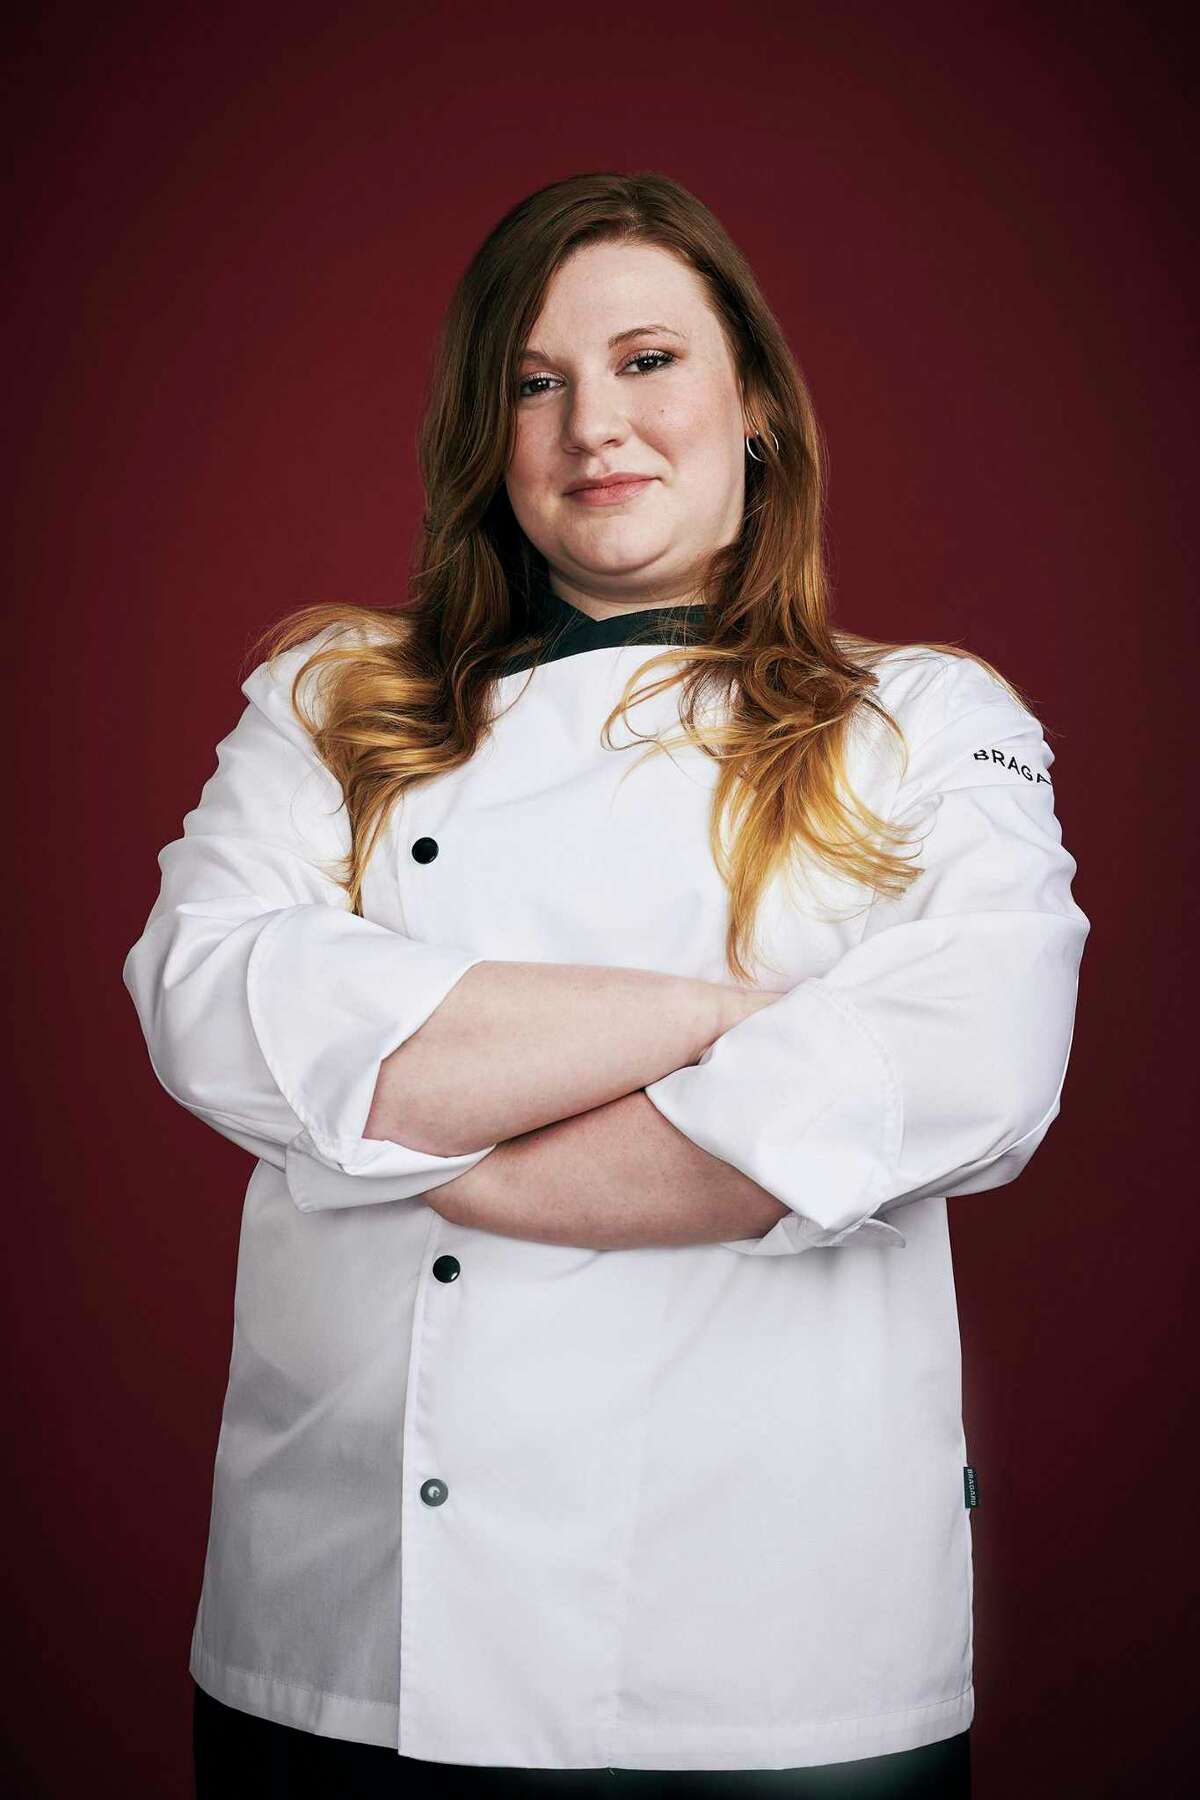 Connecticut’s Morgana Vesey, a competitor on “Hell’s Kitchen Young Guns,” is currently a chef at Water Street Cafe in Stonington Borough.